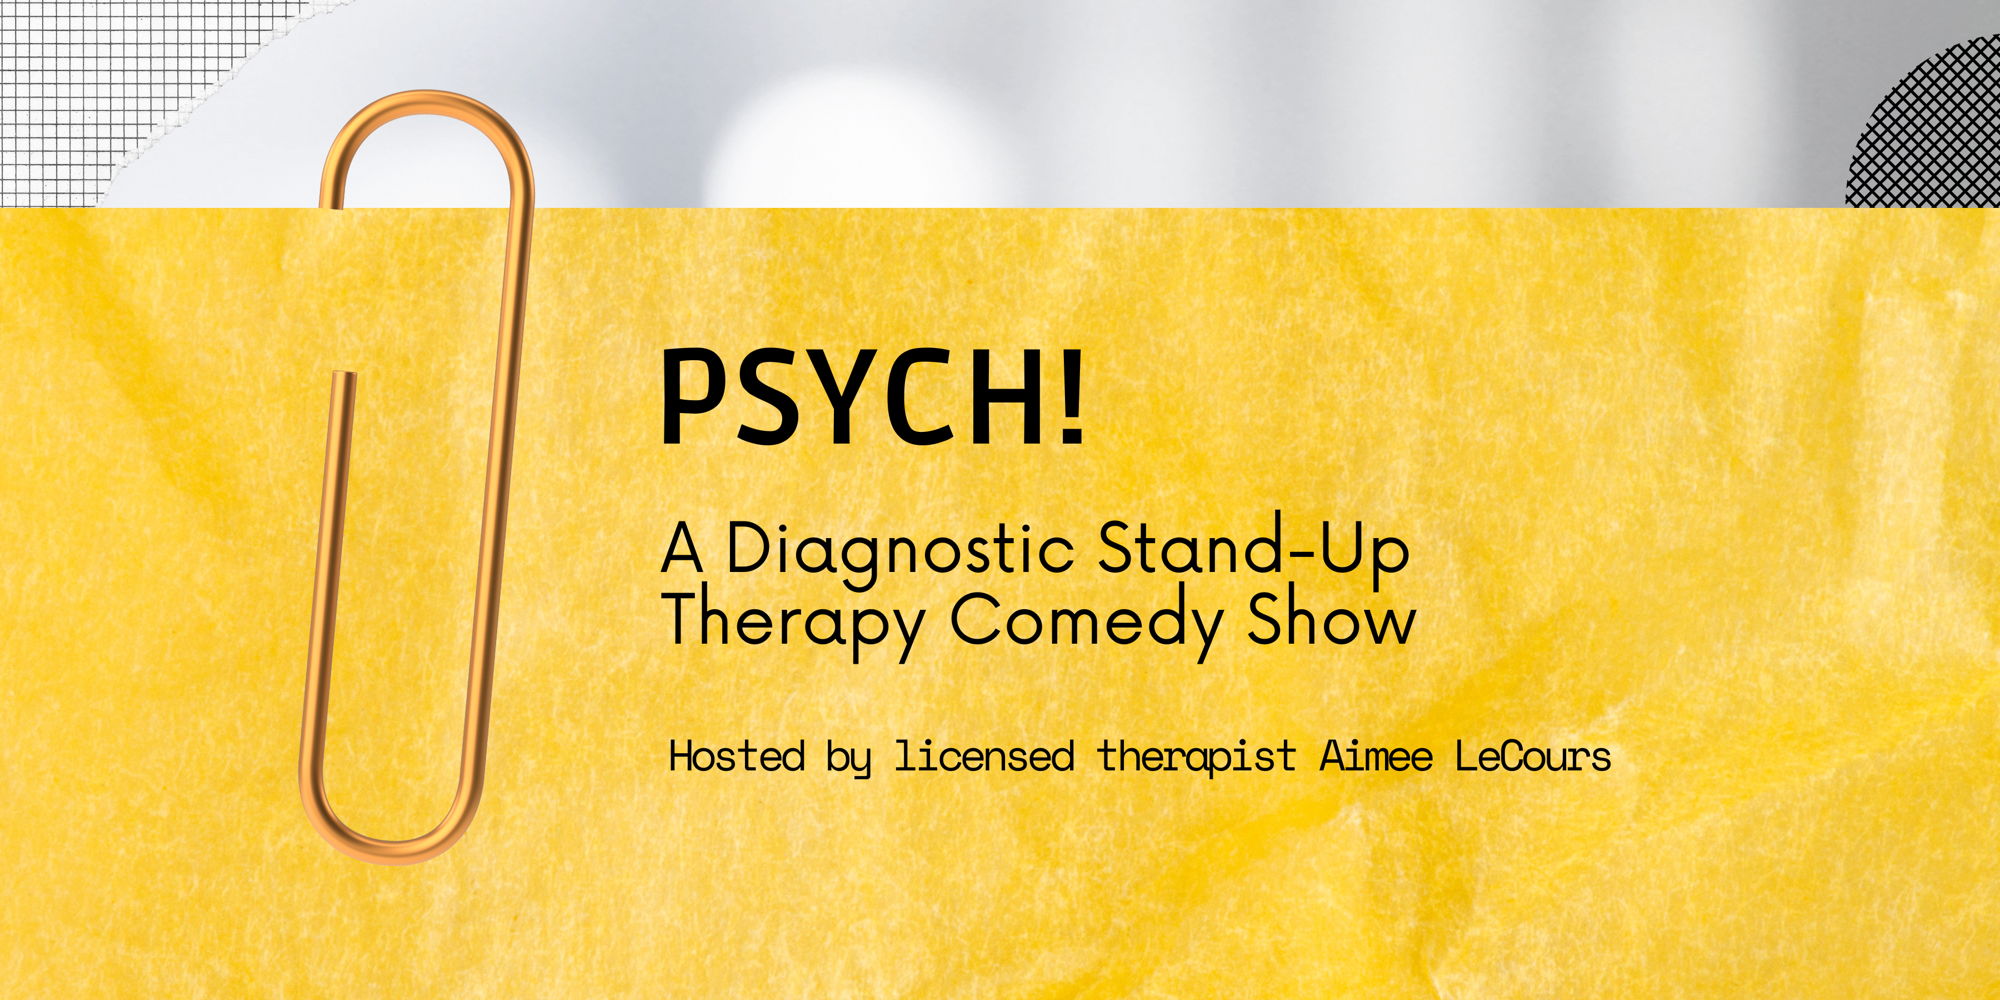 PSYCH! A DIAGNOSTIC STAND-UP THERAPY COMEDY SHOW promotional image